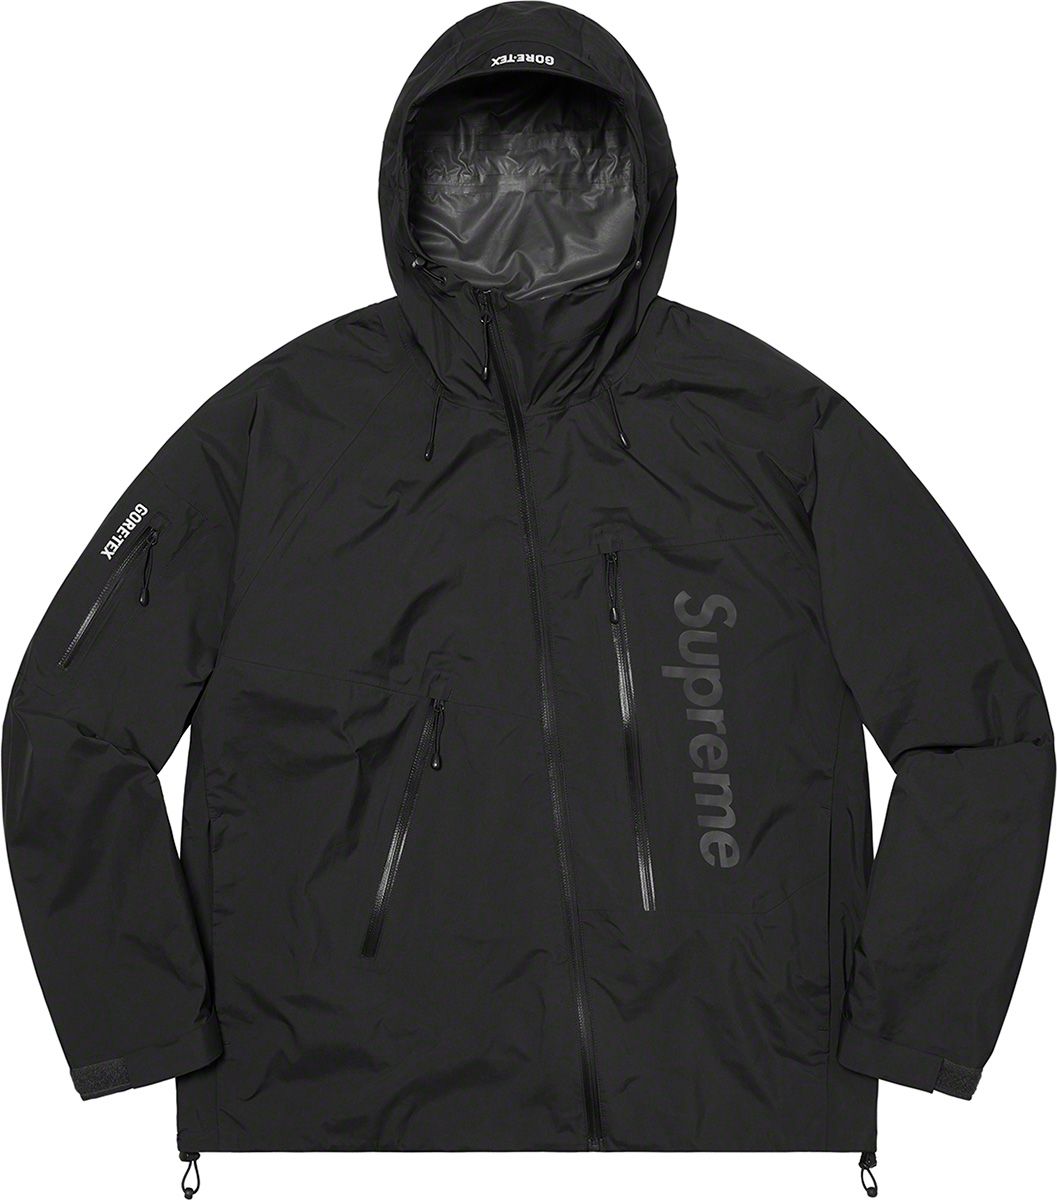 GORE-TEX Paclite Shell Jacket - Spring/Summer 2021 Preview – Supreme